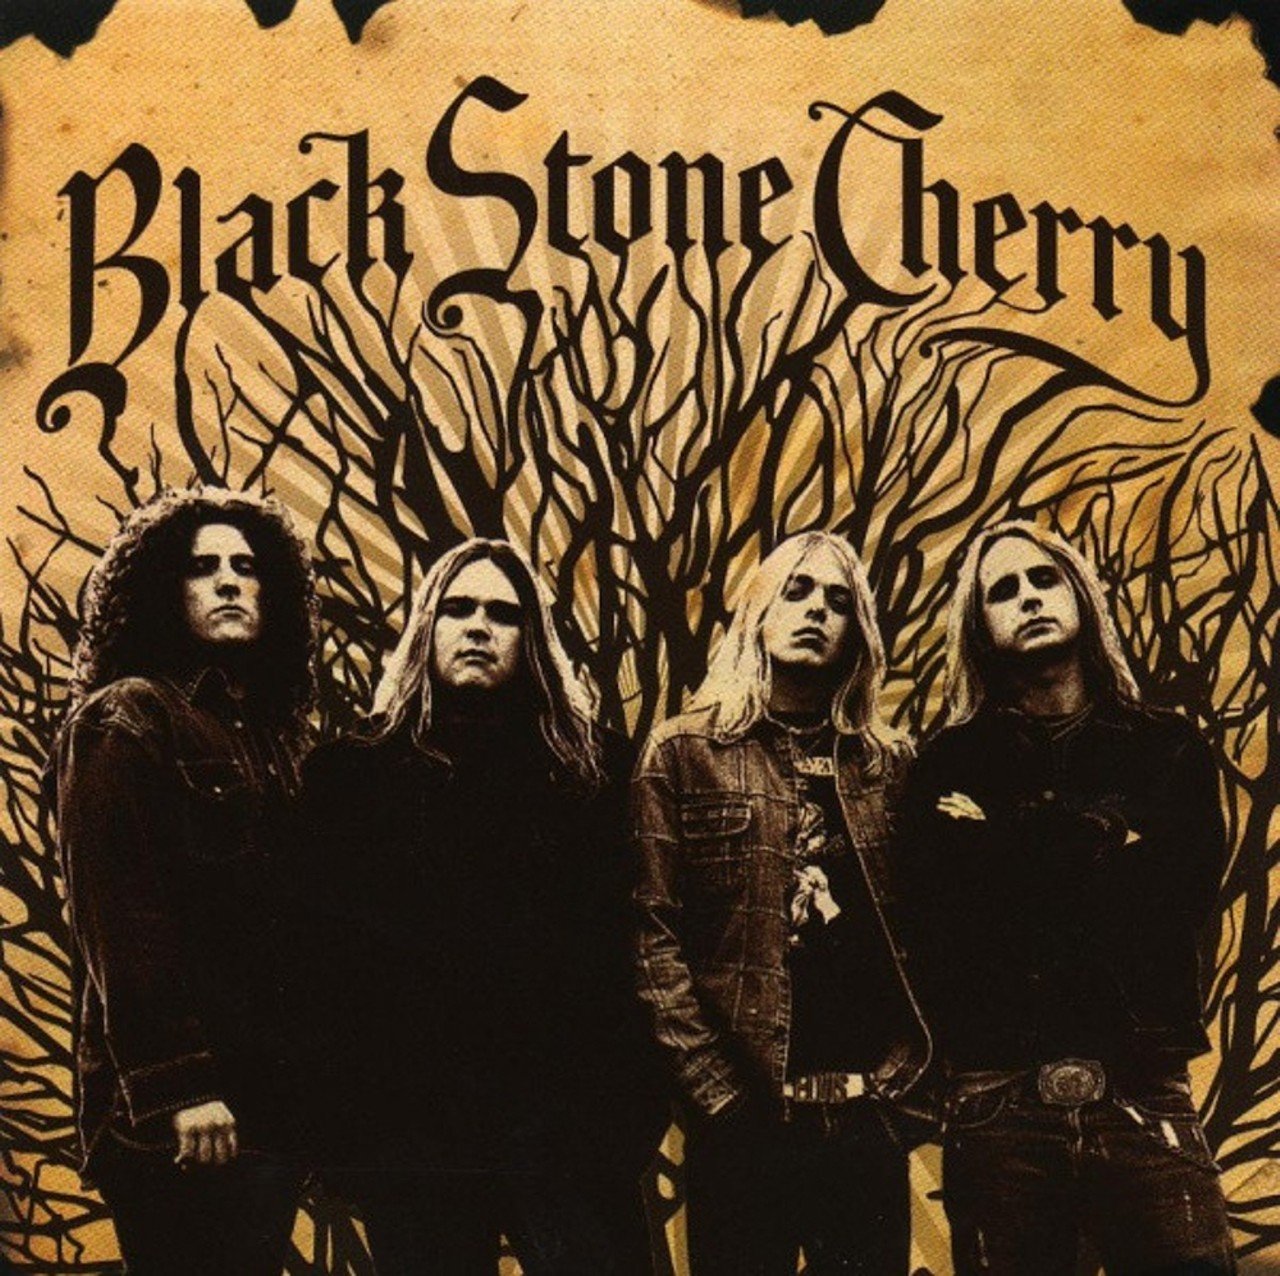  Black Stone Cherry &#151; &#147;When the Weight Comes Down&#148; 
&#147;Lights out on 42nd Street in New York City
The Ohio's runnin' backwards down in Louisville, Kentucky&#148;